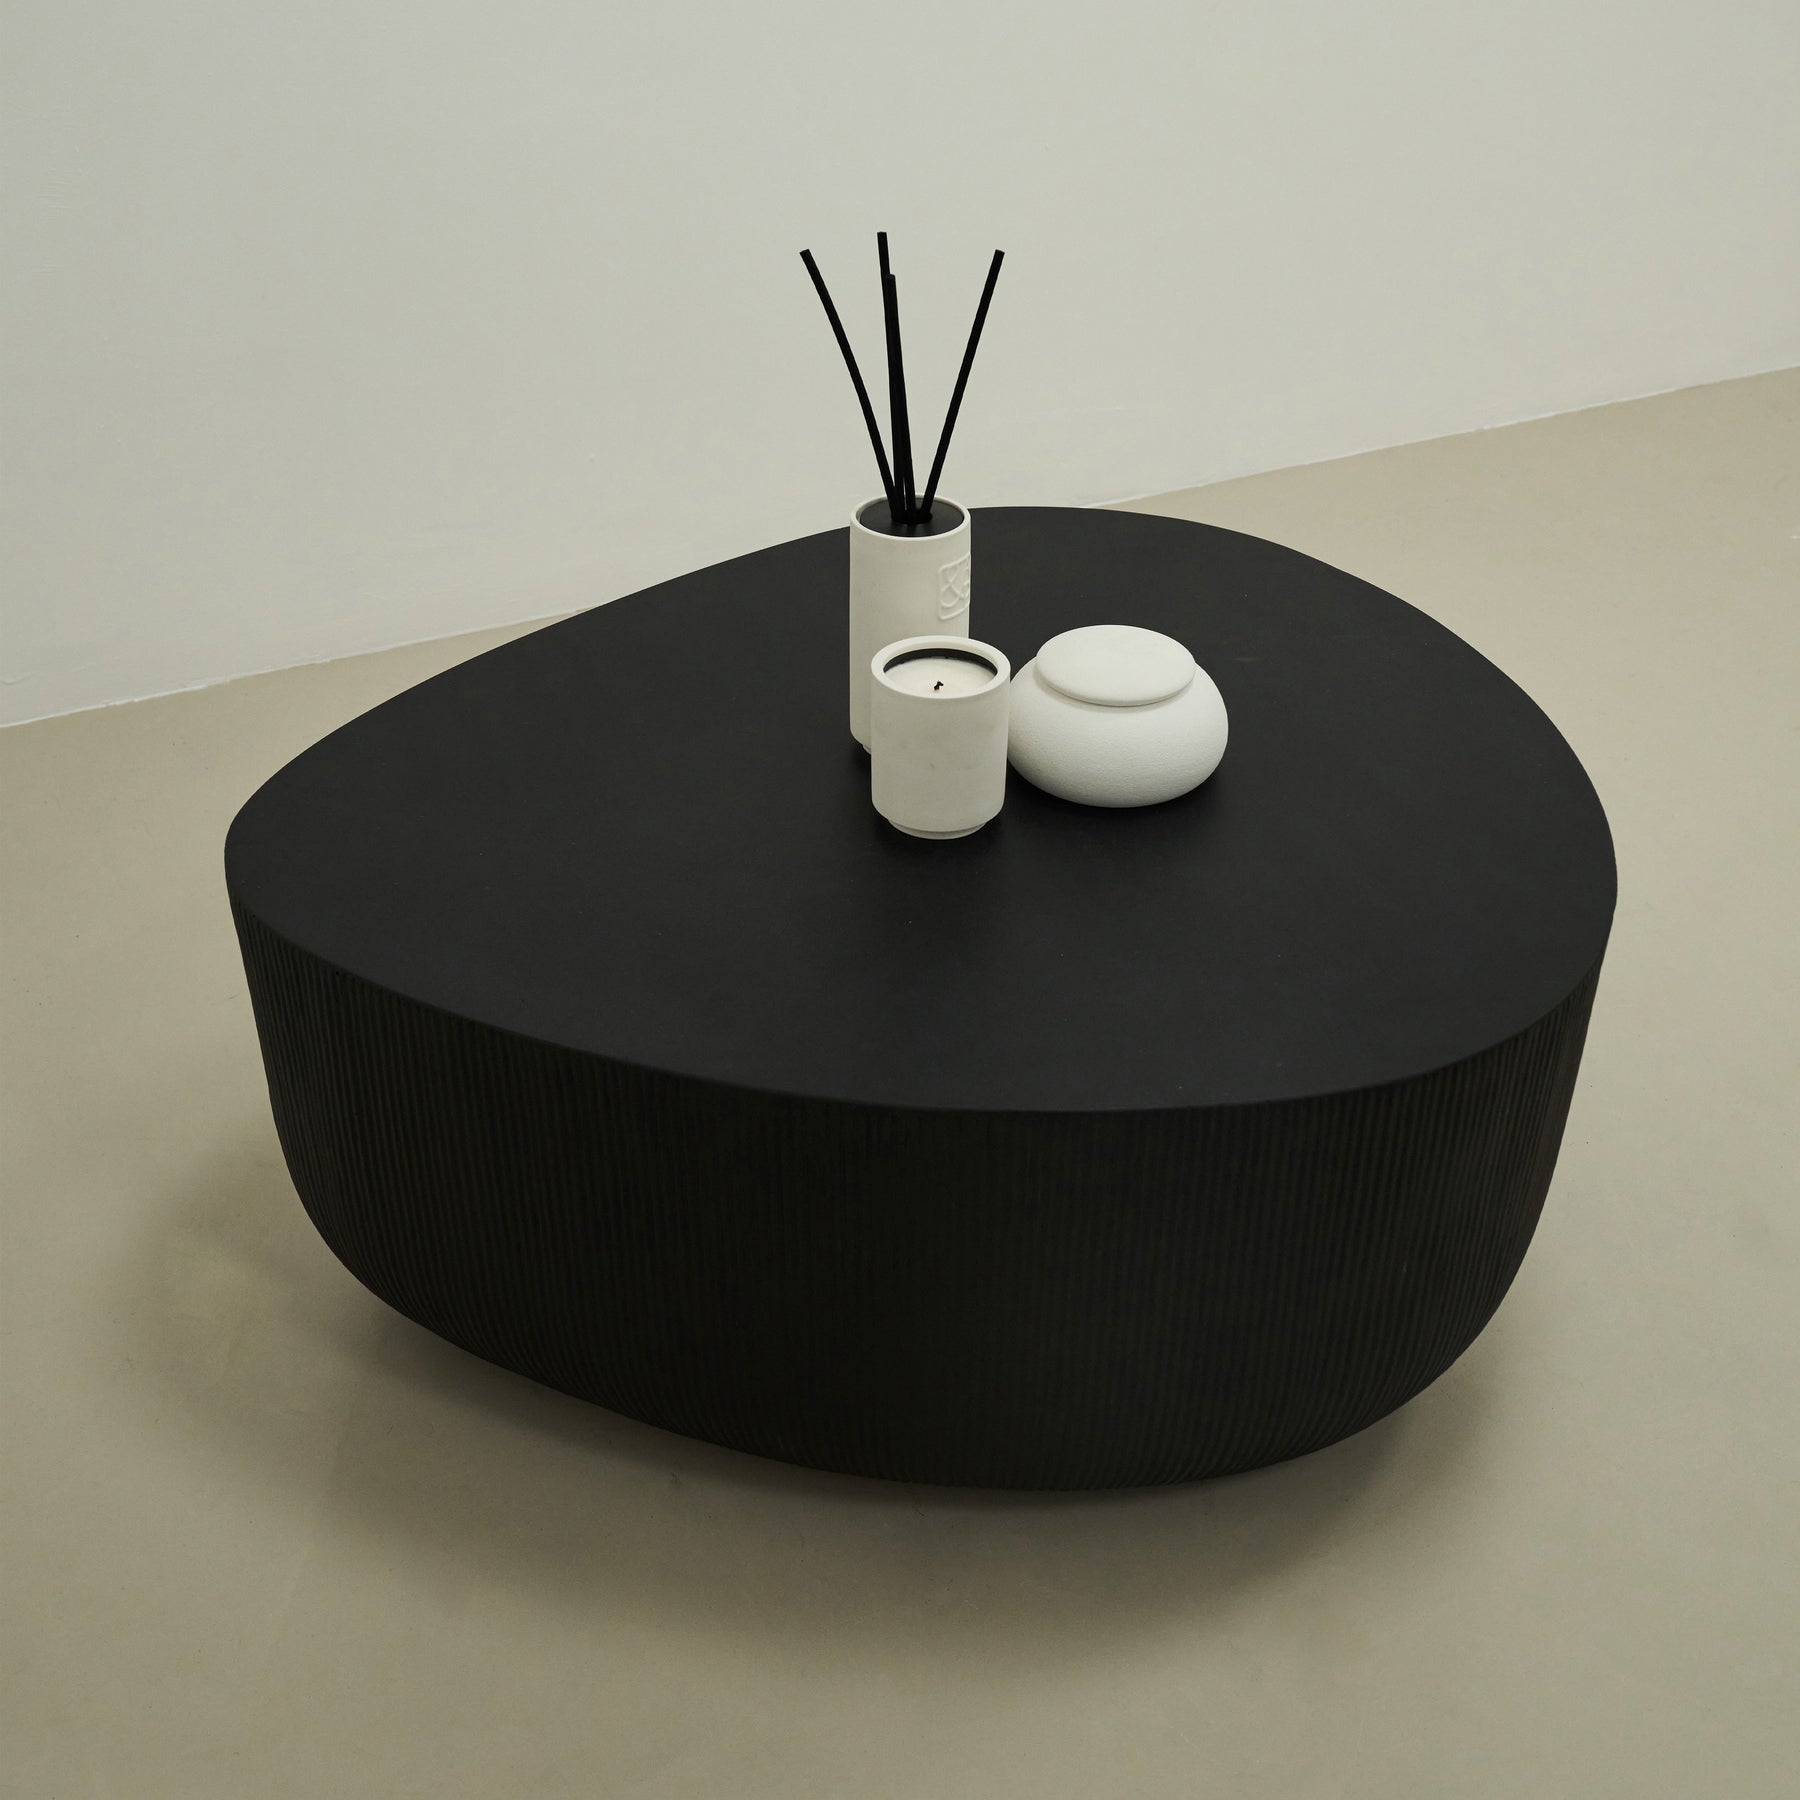 Minimal Onyx Irregular Shaped Coffee Table Large in muted room, decorated with candles and incense